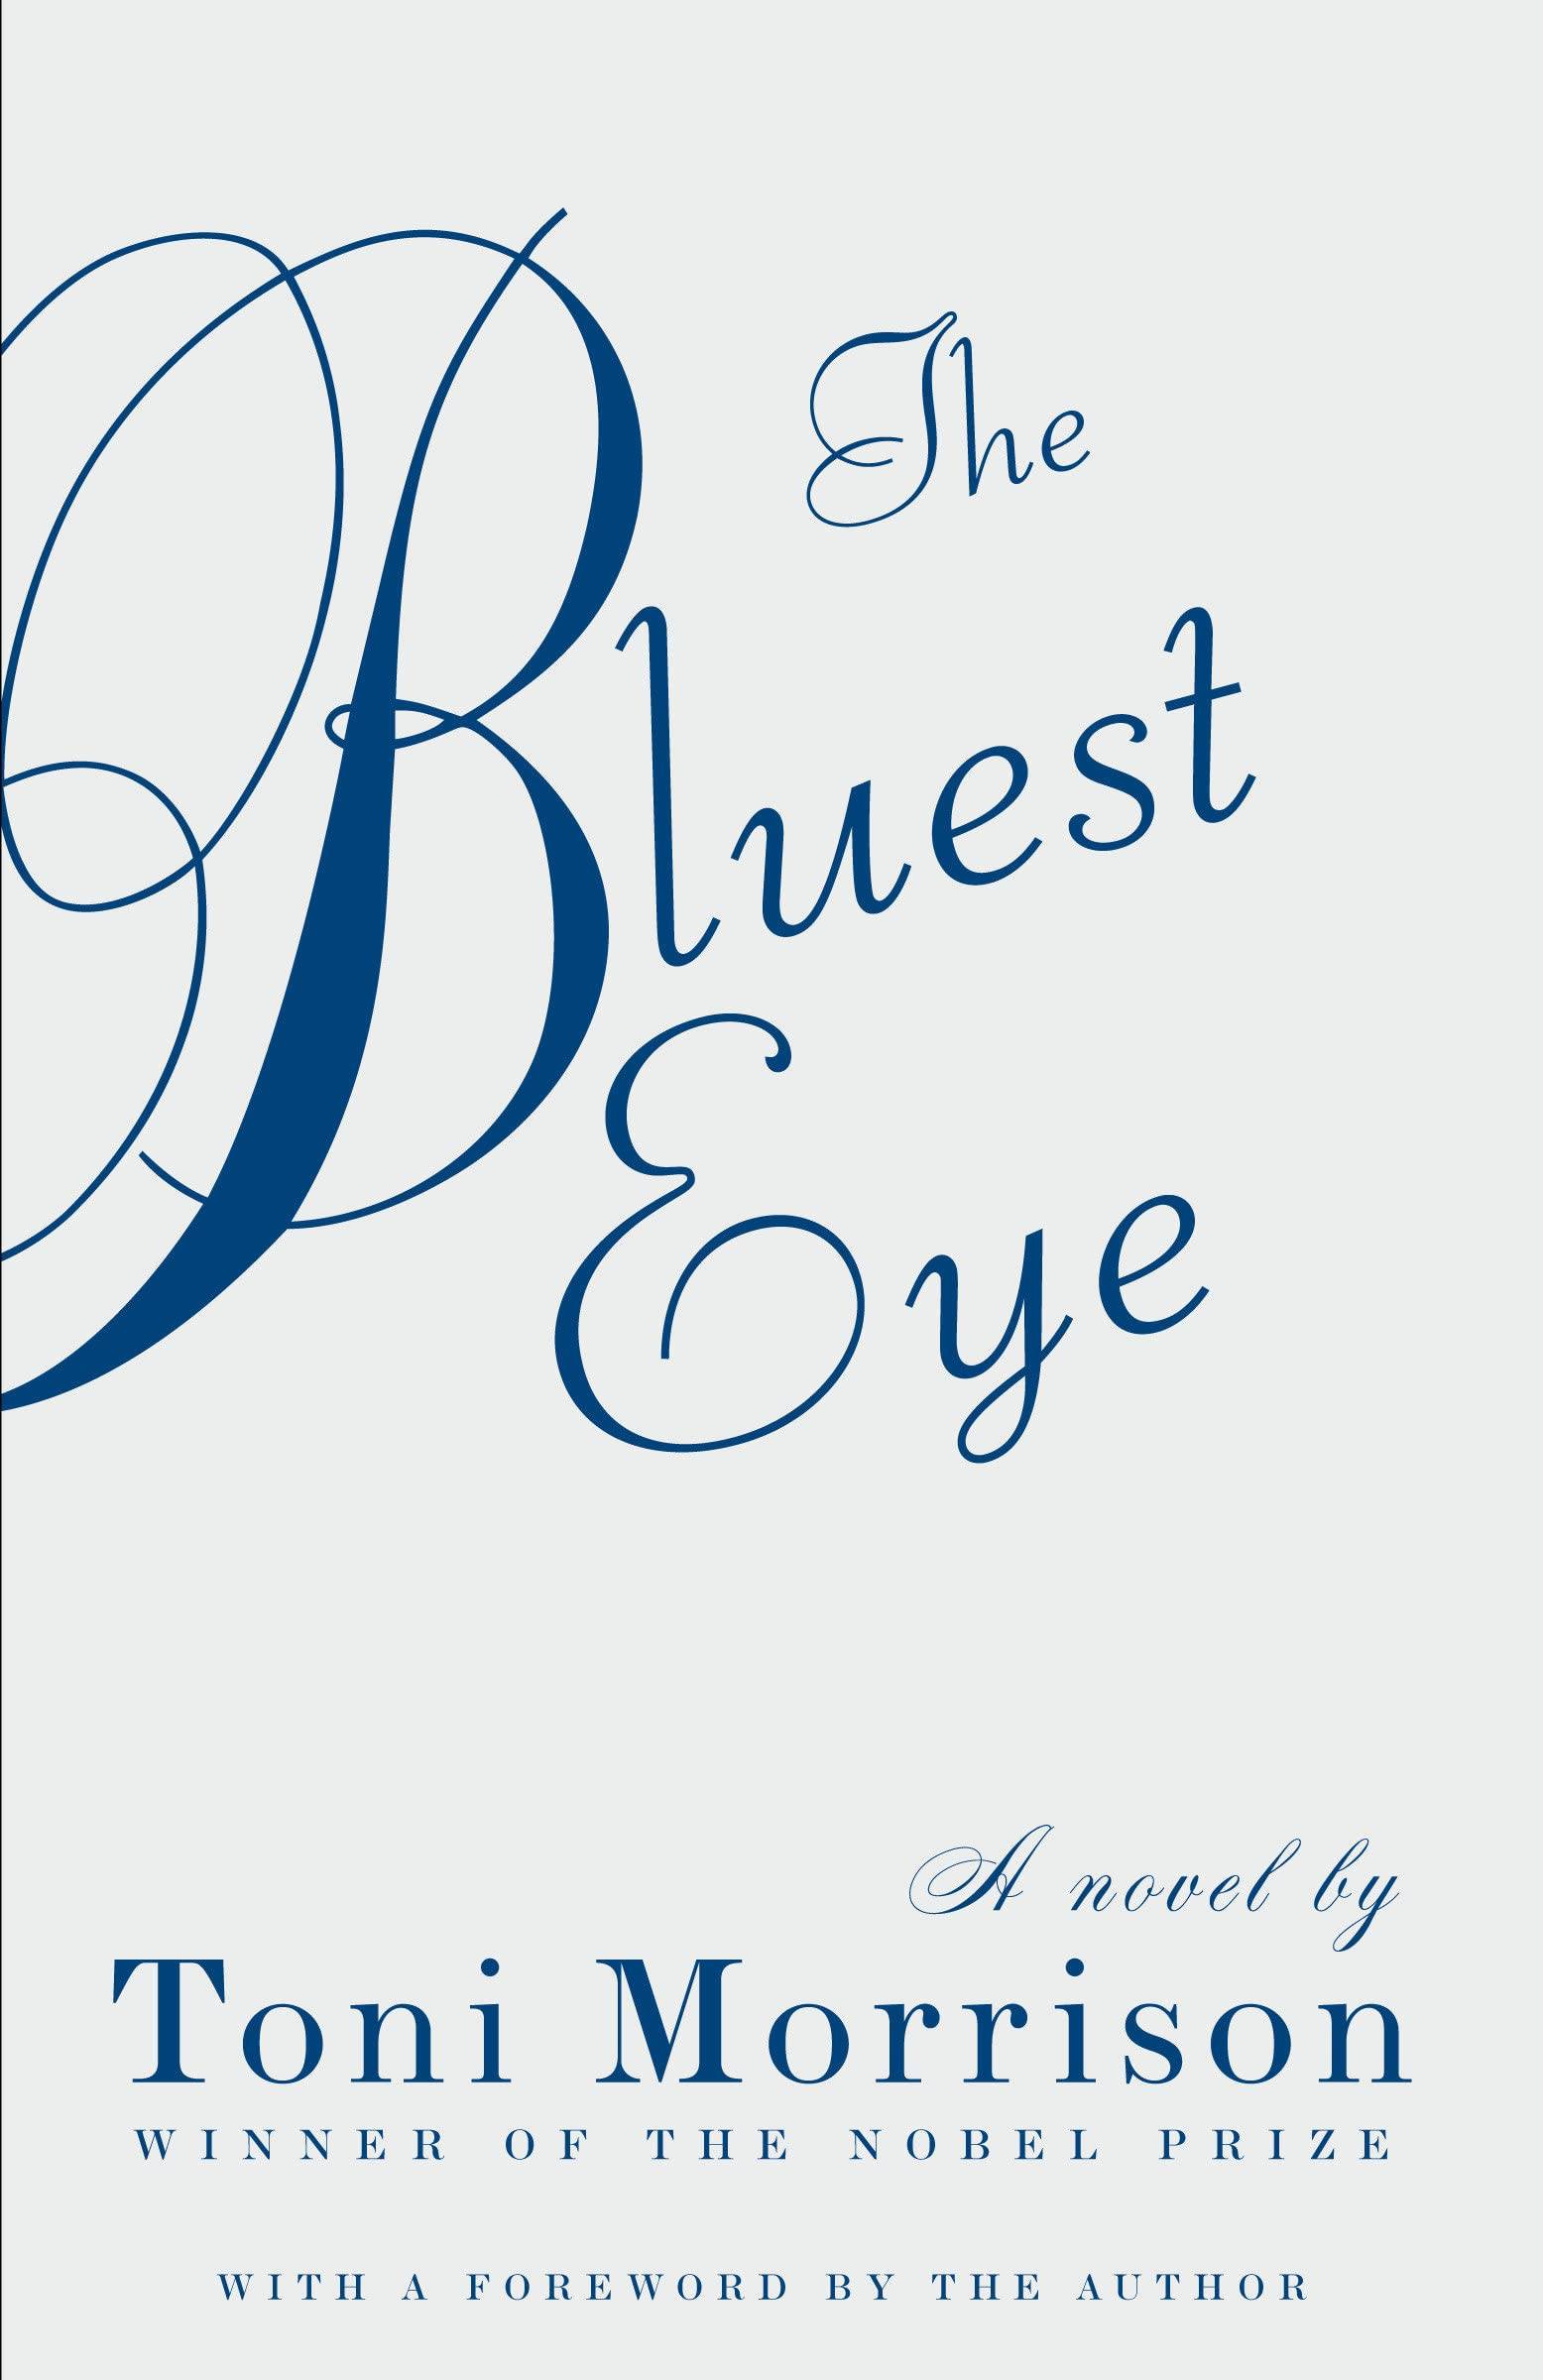 White book cover with blue script font